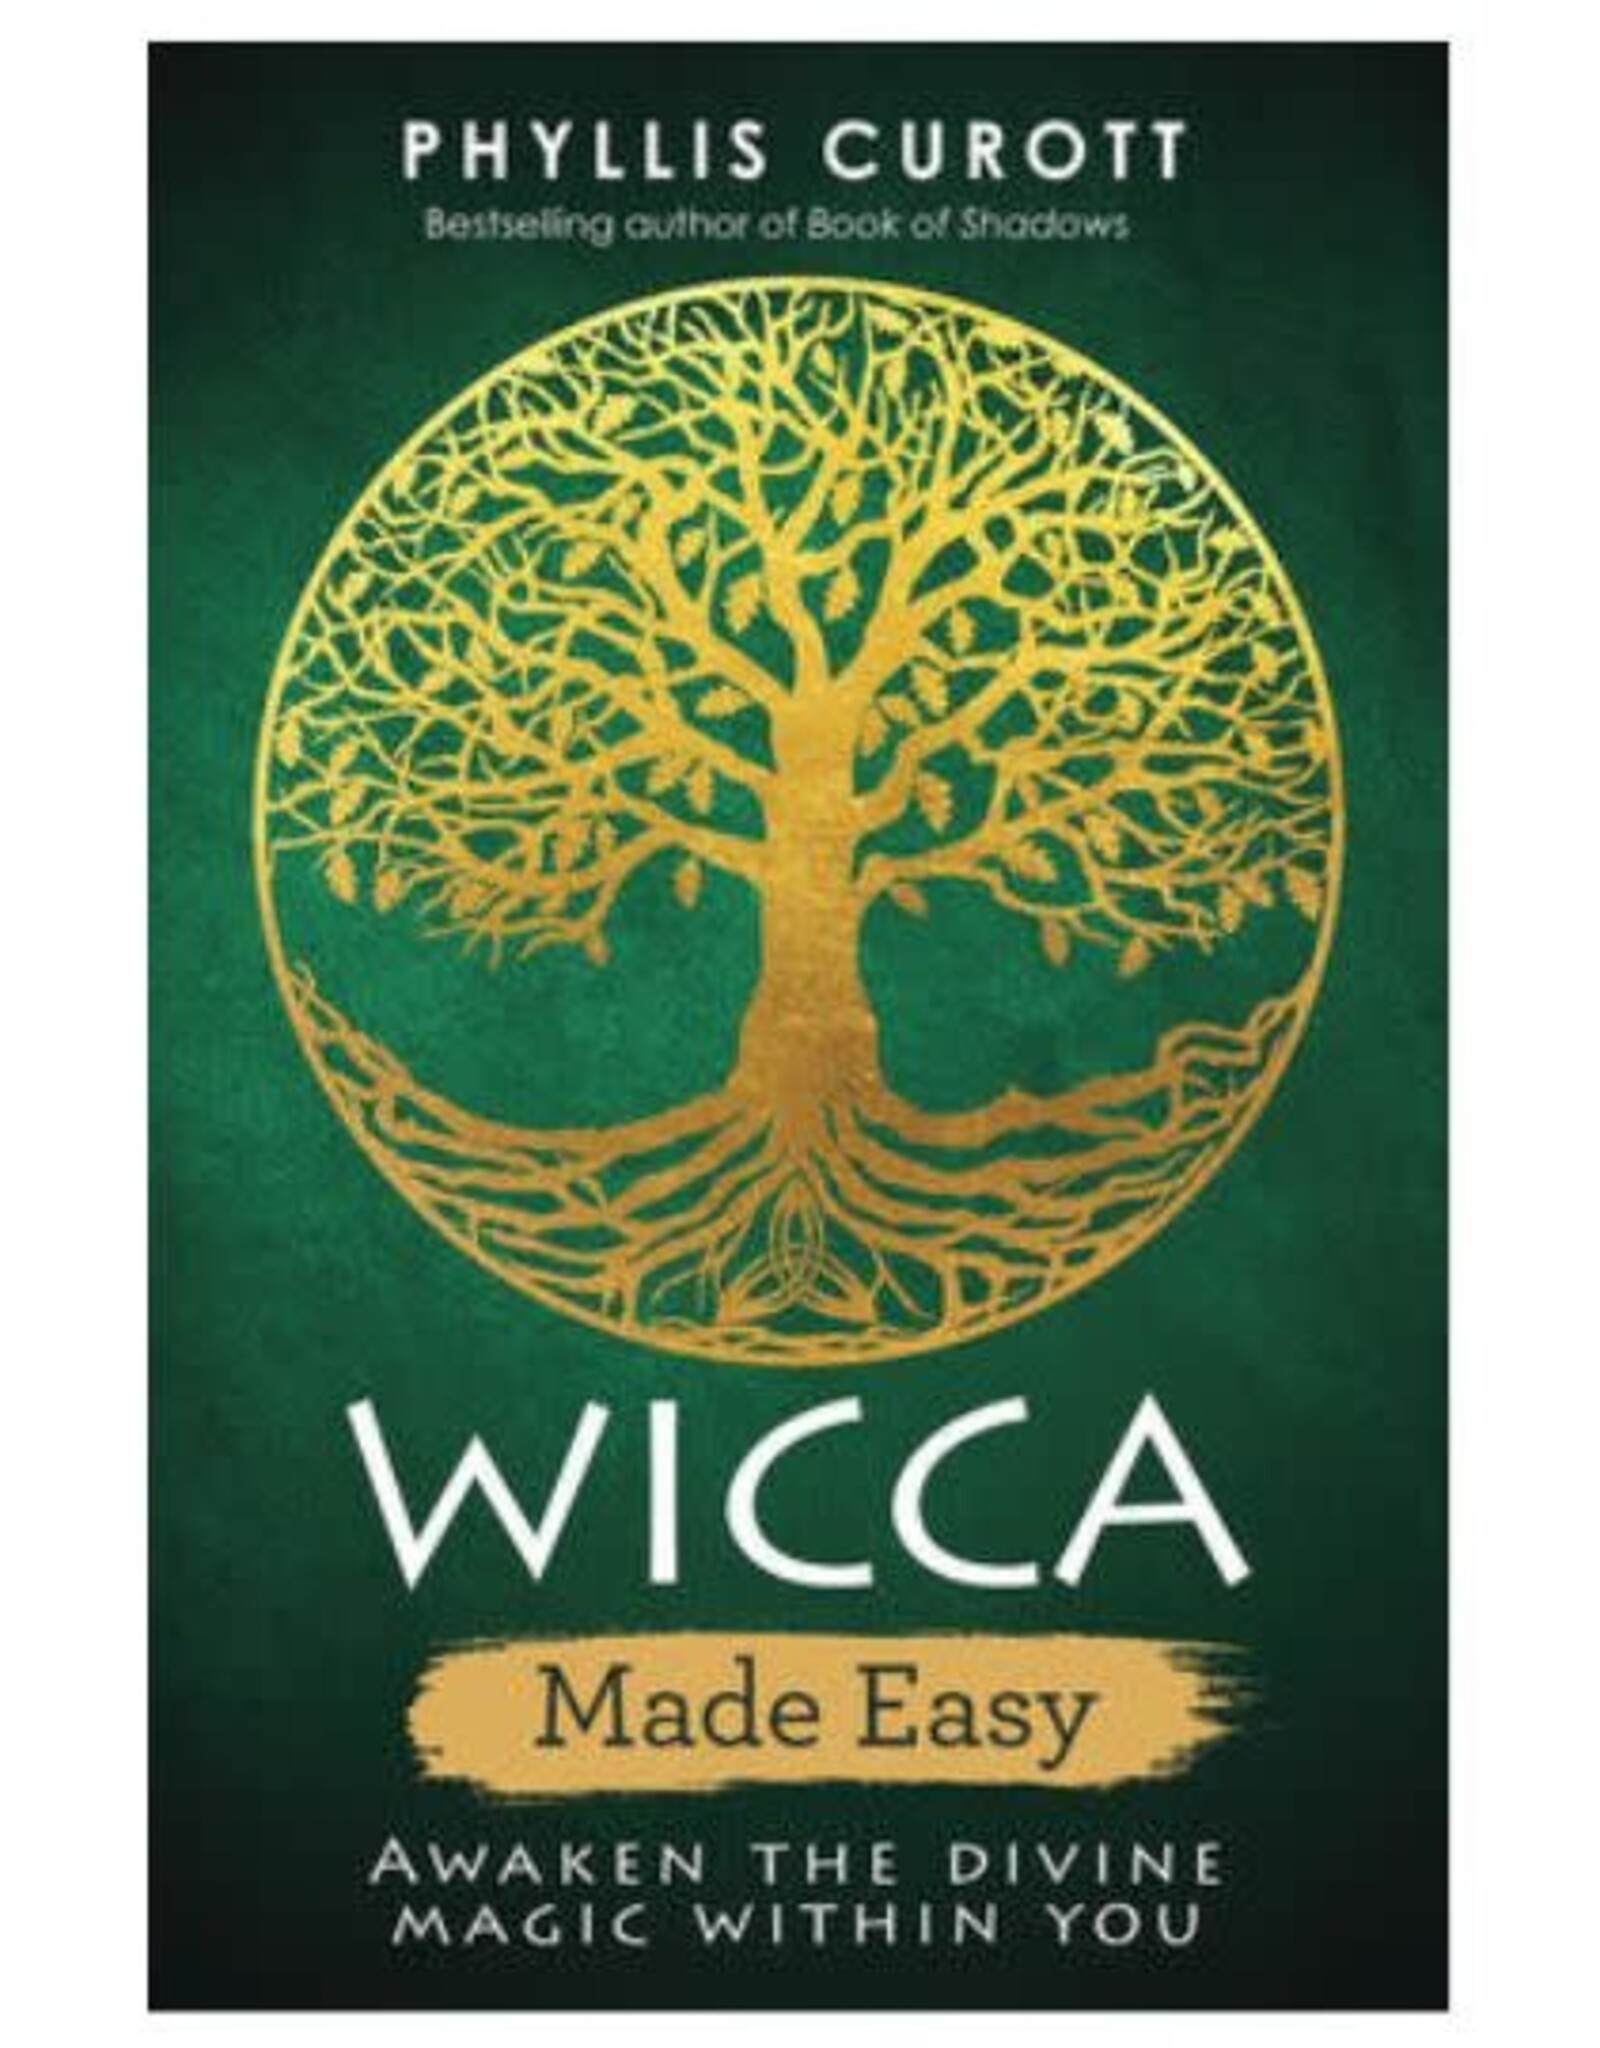 Wicca Made Easy by Phyllis Curott